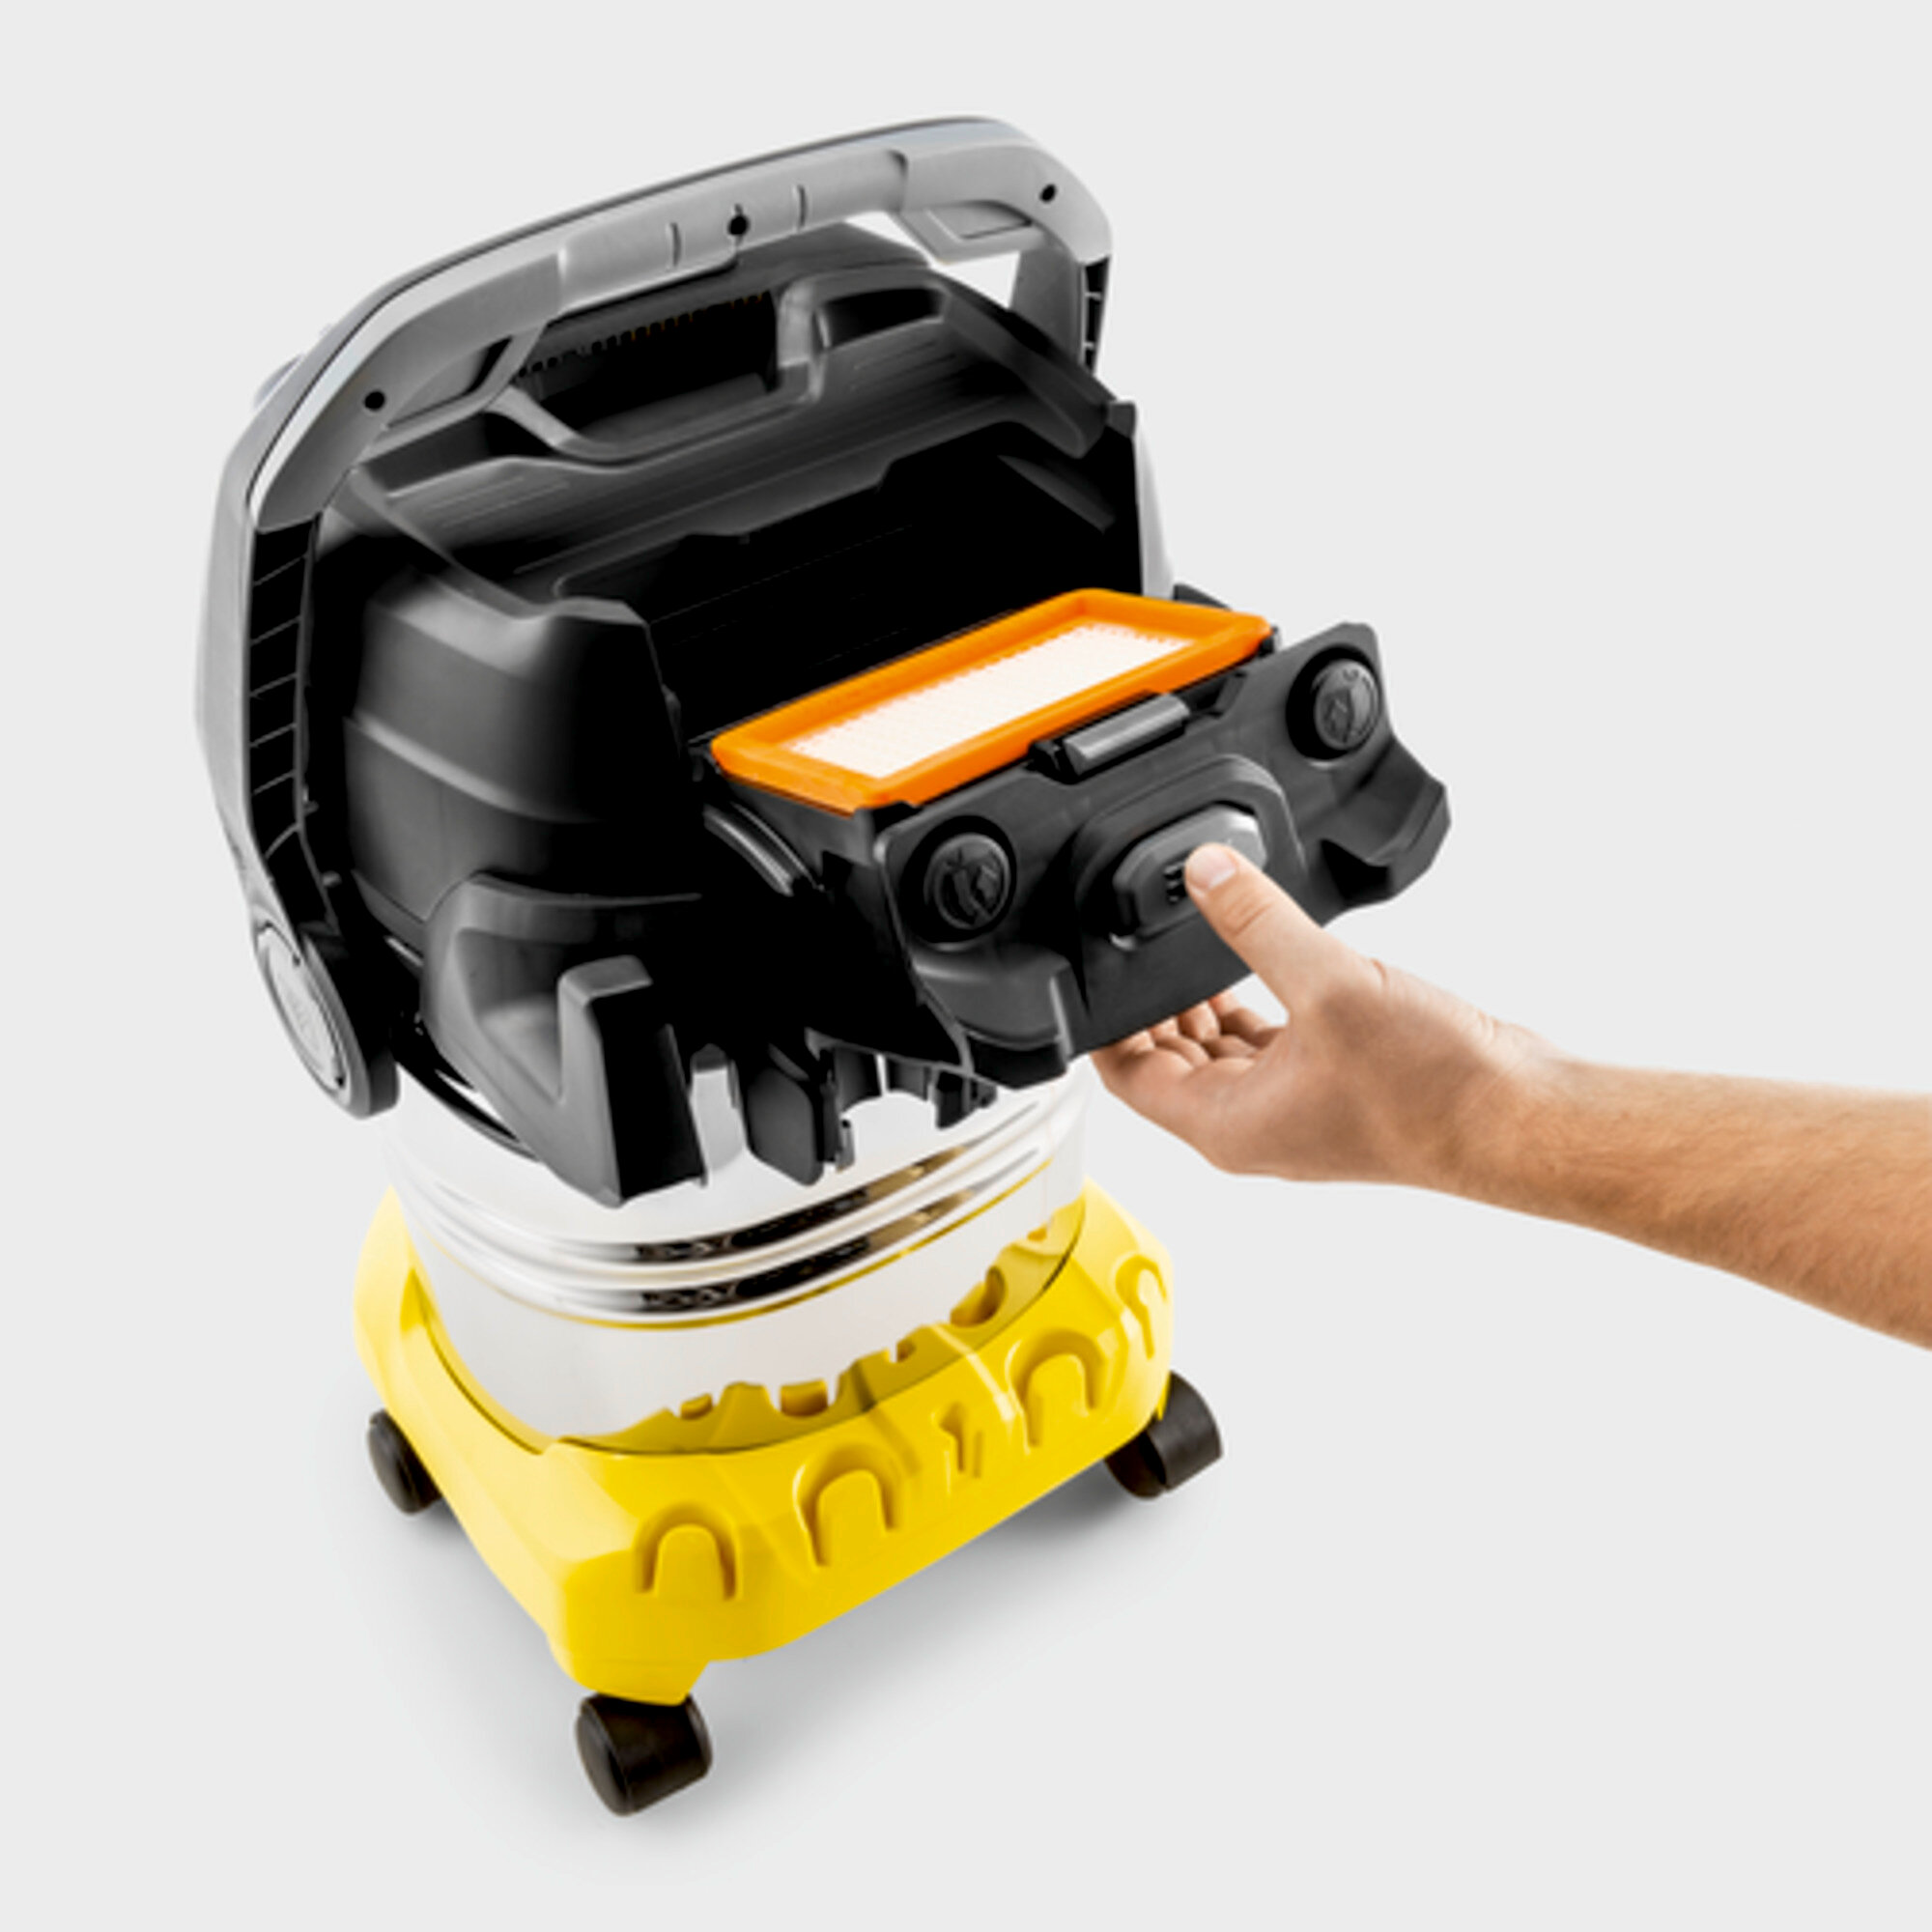 Karcher KWD 1-vacuum cleaner for solid and liquid dirt. Ideal for home,  exterior and car. Includes nozzle grooves, filter felt, tubes suction,  suction